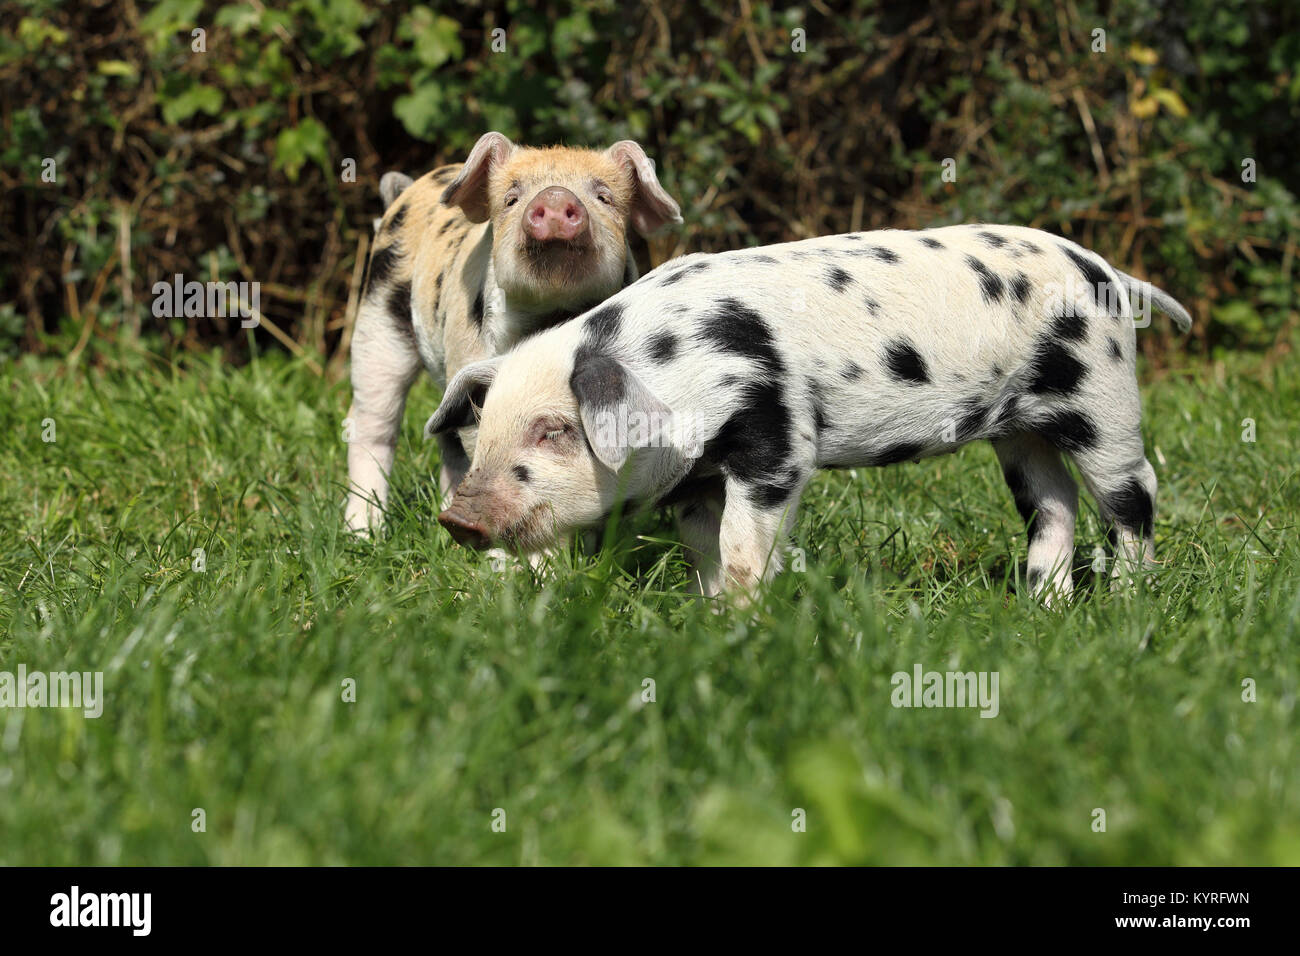 Domestic Pig, Turopolje x ?. Two piglets (3 weeks old) standing on a meadow. Germany Stock Photo